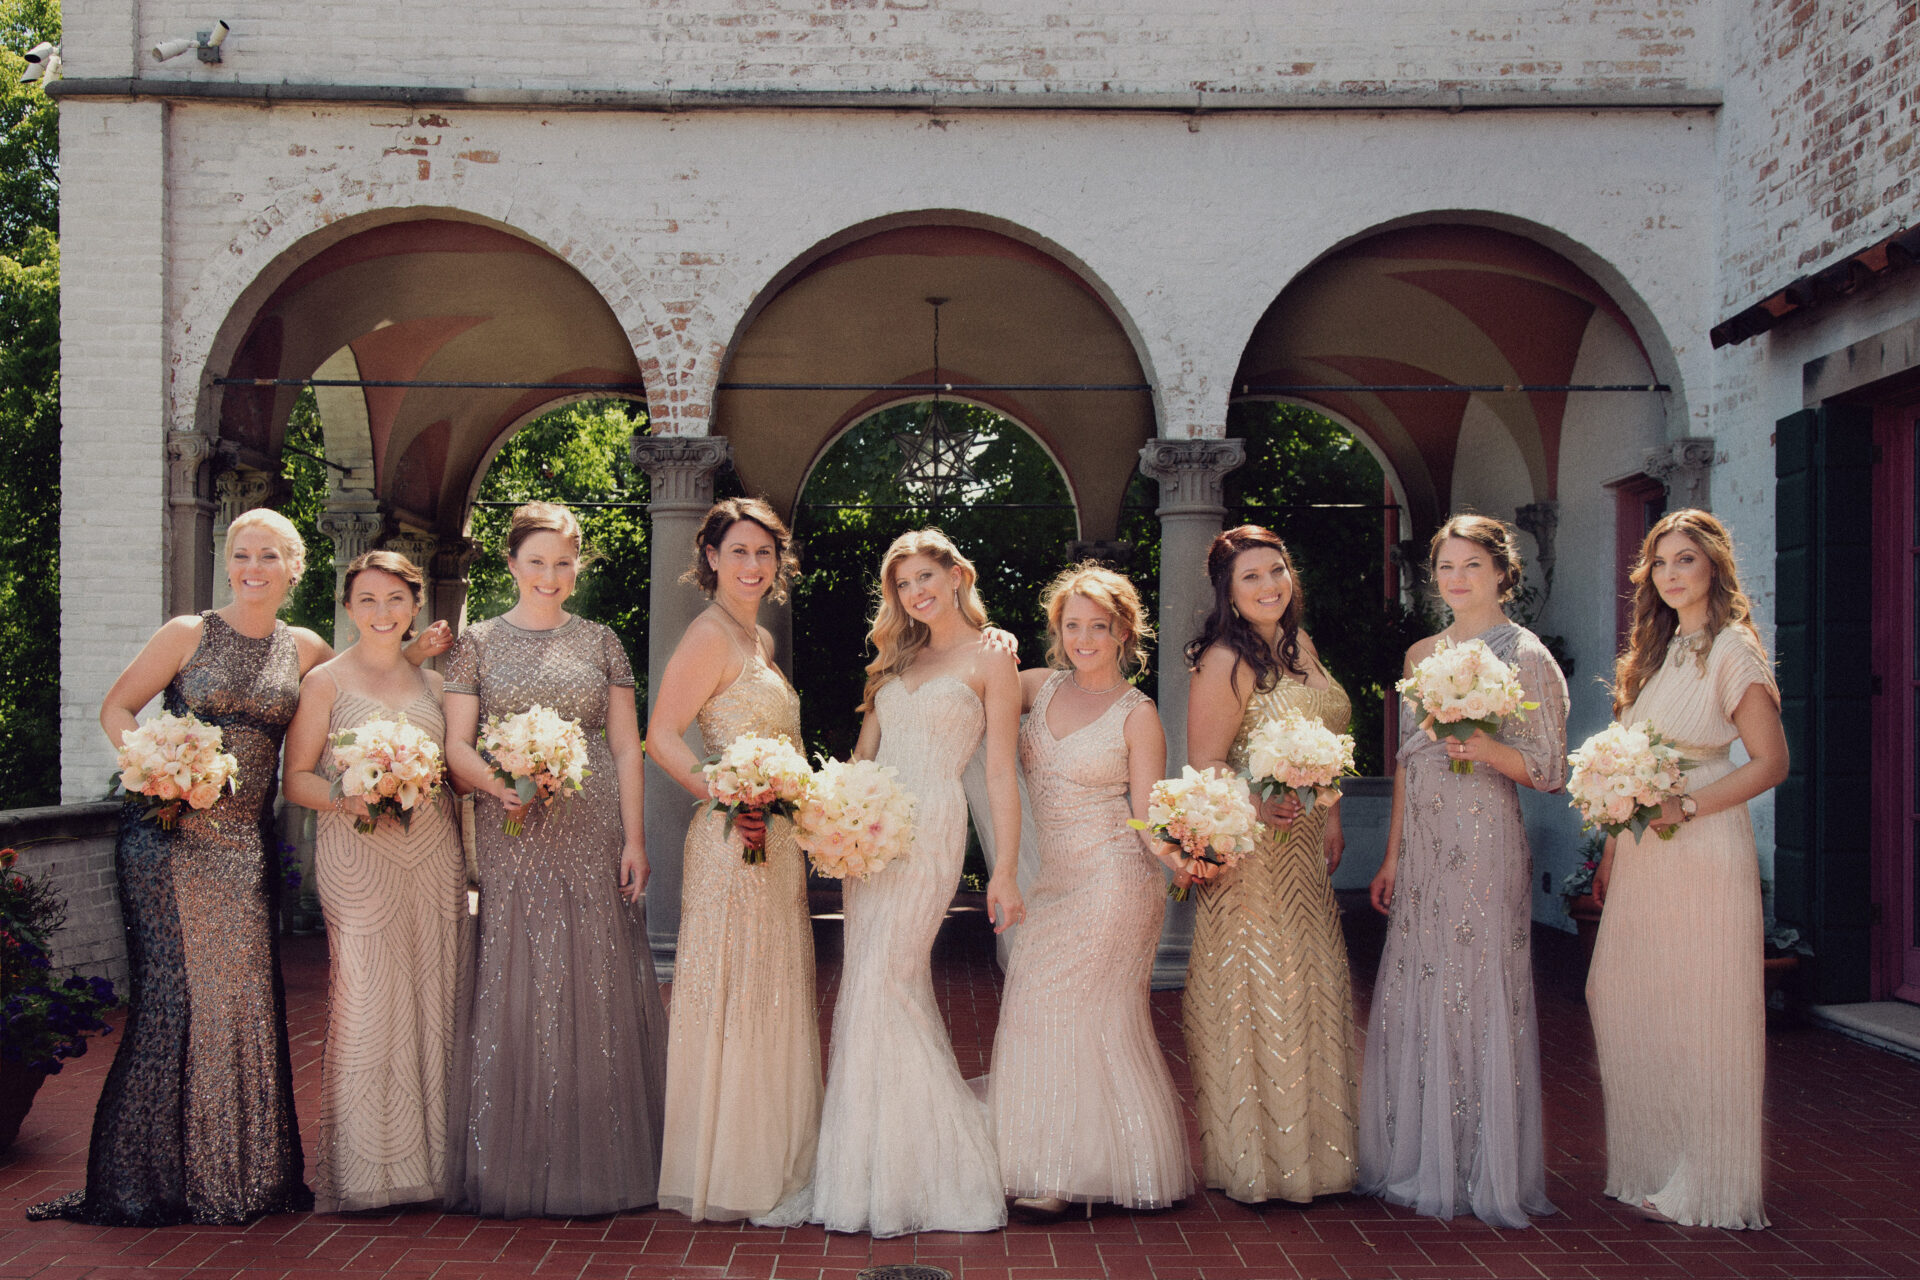 Wedding photo of a group of brides maids by Astrapia Photography